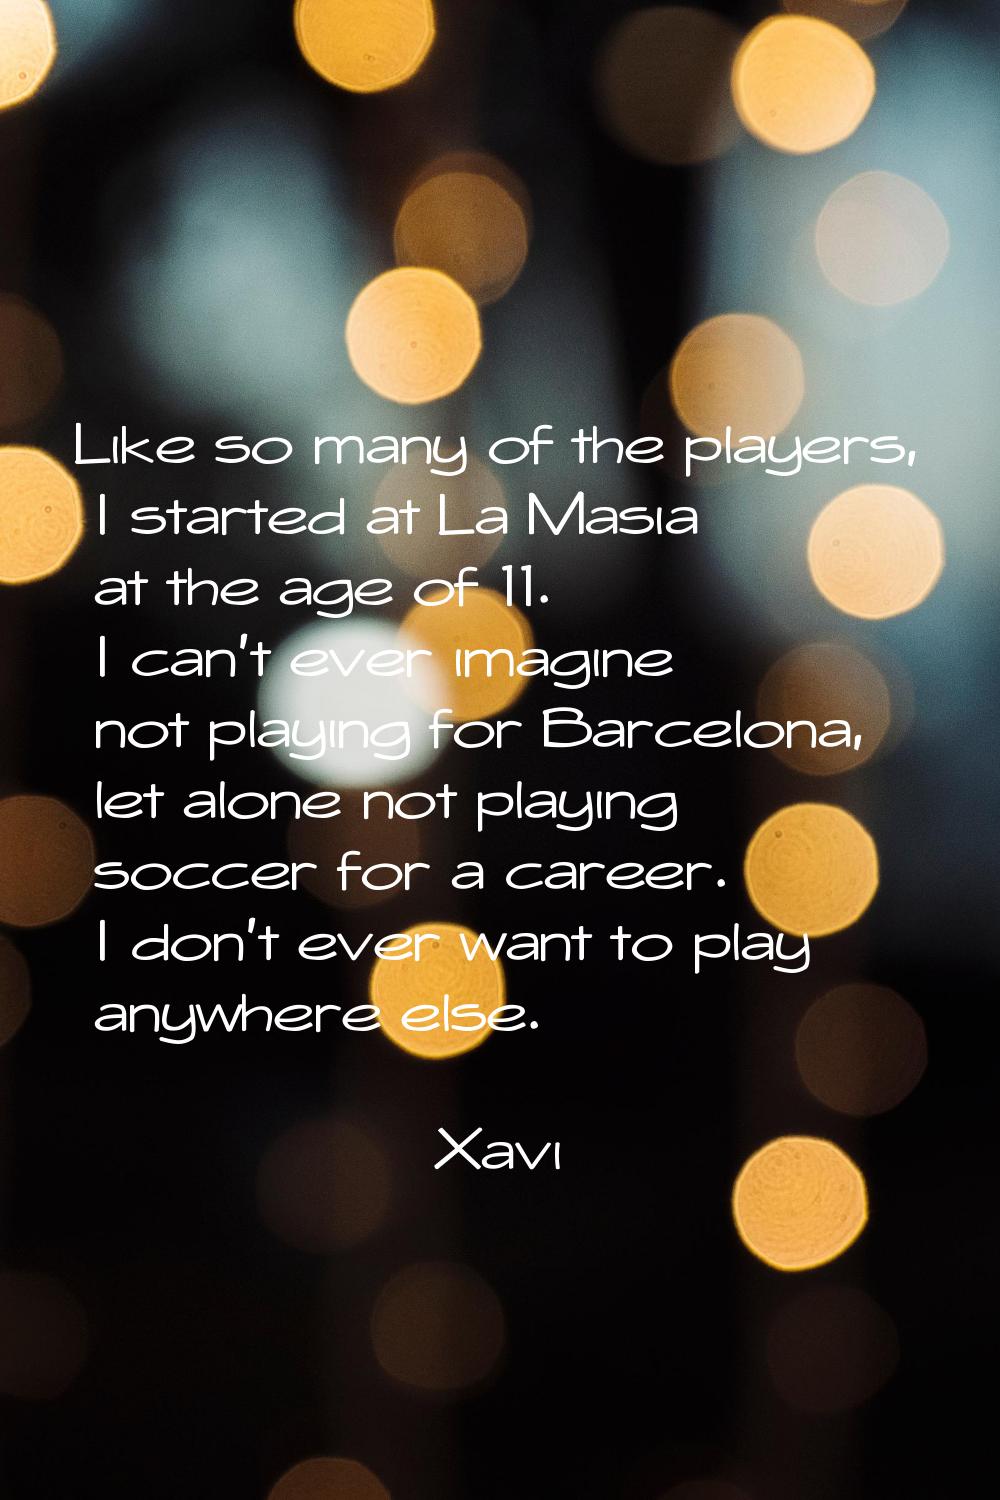 Like so many of the players, I started at La Masia at the age of 11. I can't ever imagine not playi